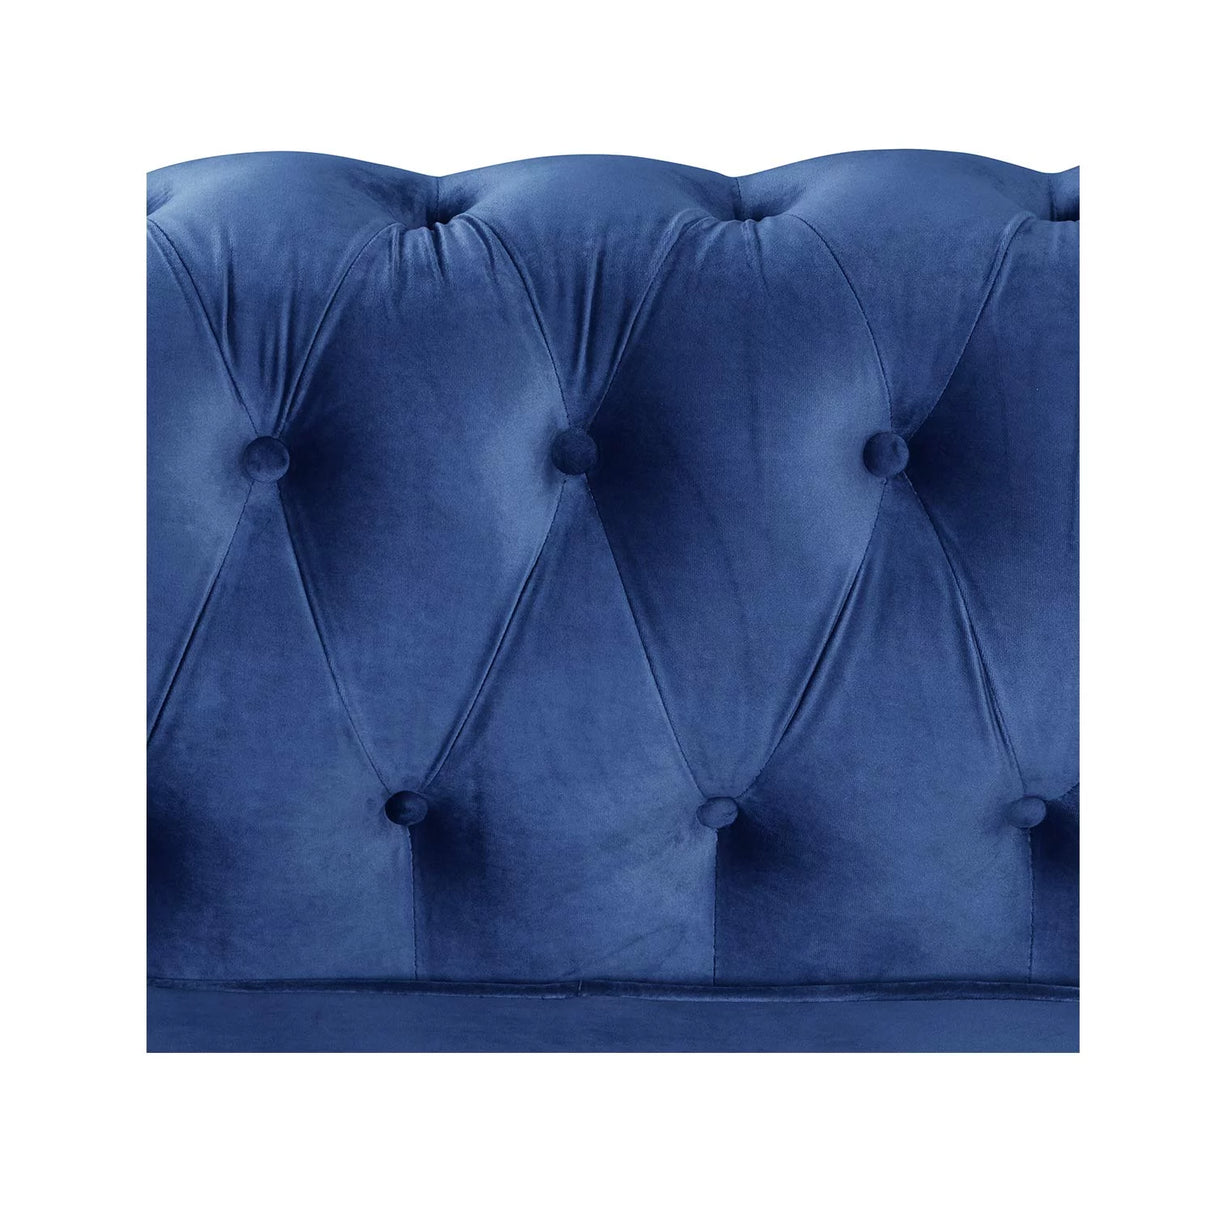 Morden Fort Couches for Living Room, Sofas for Living Room Furniture Sets, Chair, Couch and Sofa 3 Pieces, Fabric, Dutch Velvet Light Blue